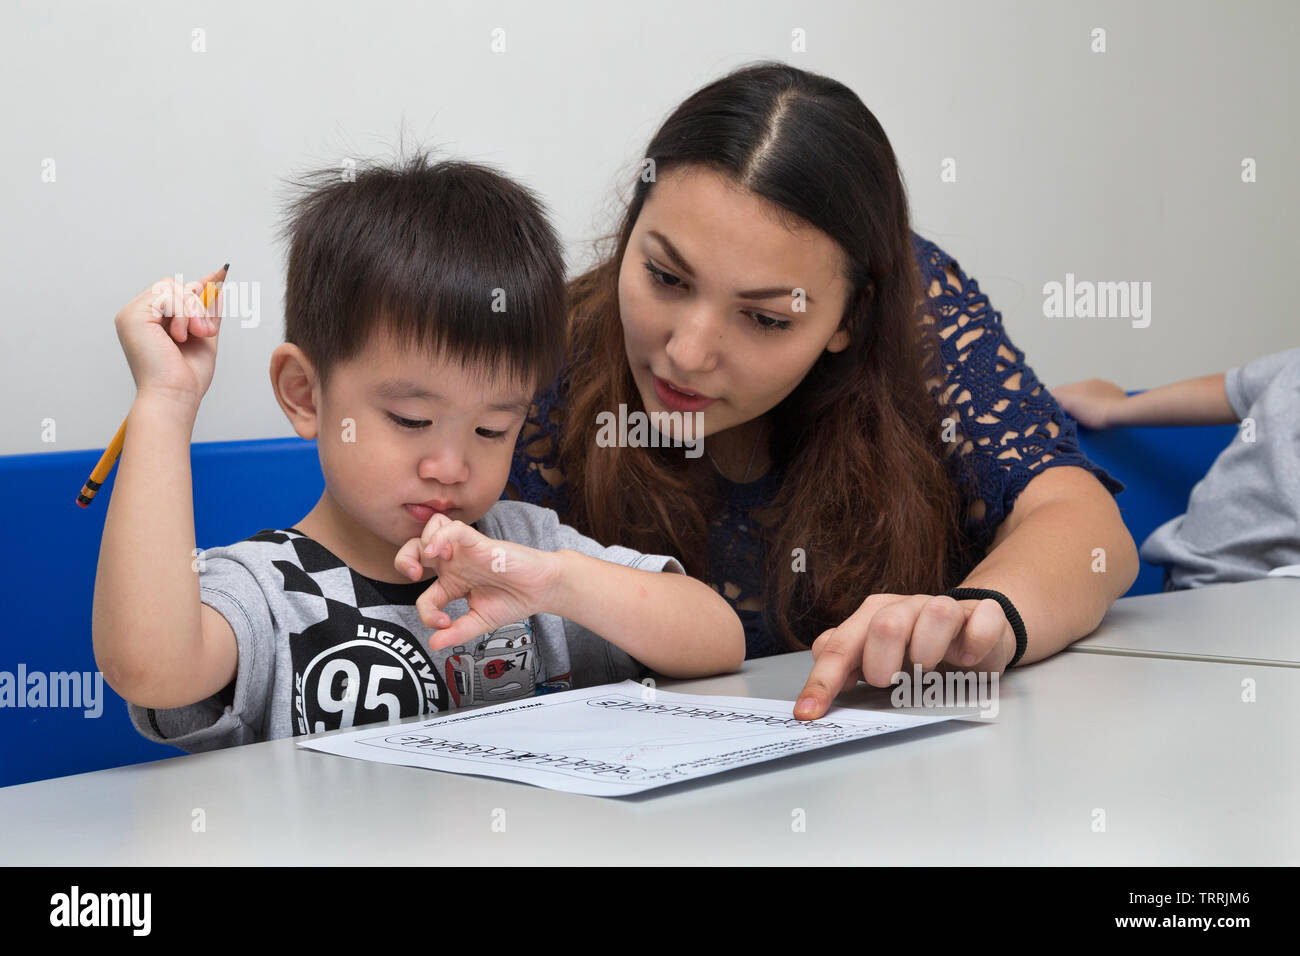 Manila, Philippines - August, 18, 2016: A female teacher teaching little boy, explaining how to write in classroom at school Stock Photo